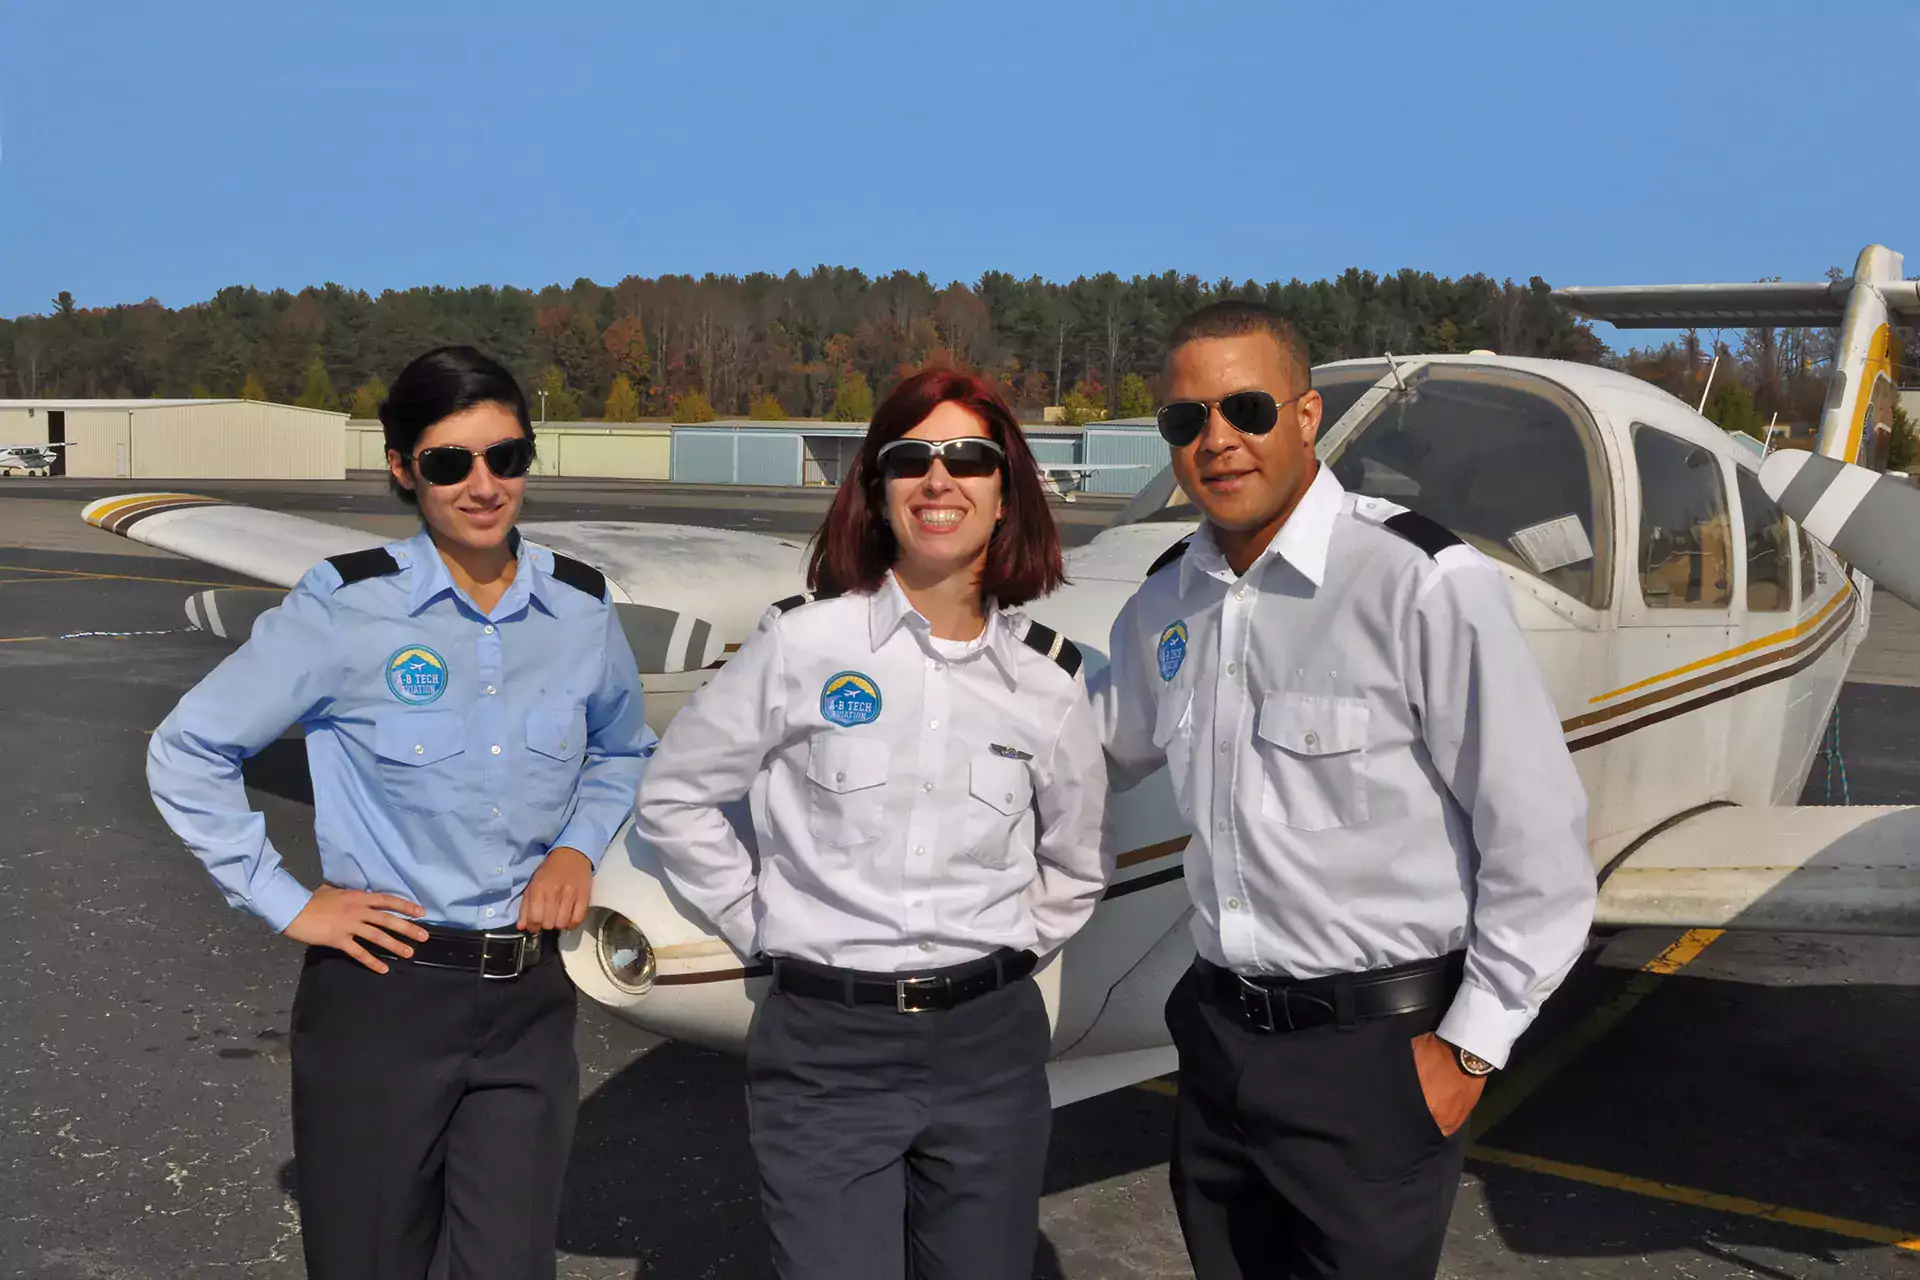 Three pilots in uniform standing in front of a plane